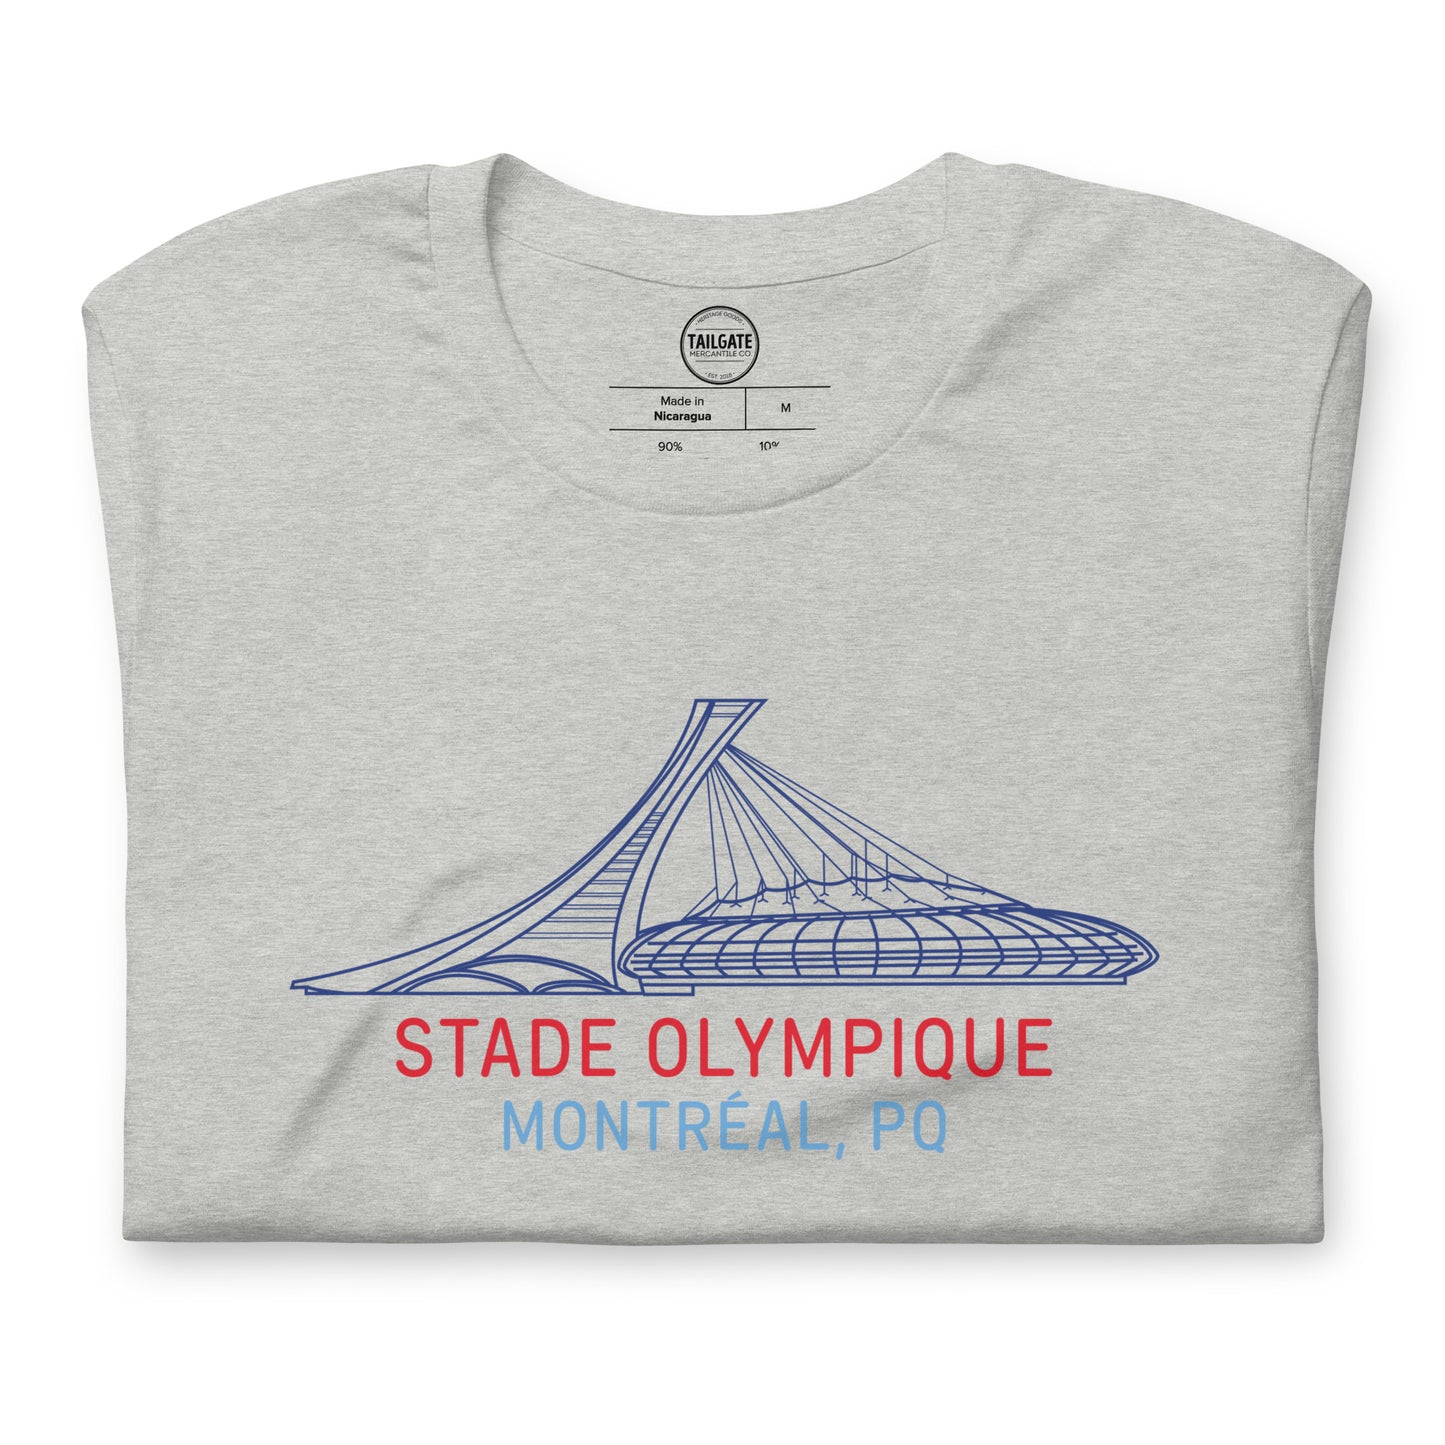 Close up image of heather athletic grey t-shirt with design of "Stade Olympique, Montreal, PQ" illustrated ballpark completed in retro Montreal Expos colours located on centre chest. This design is exclusive to Tailgate Mercantile and available only online.